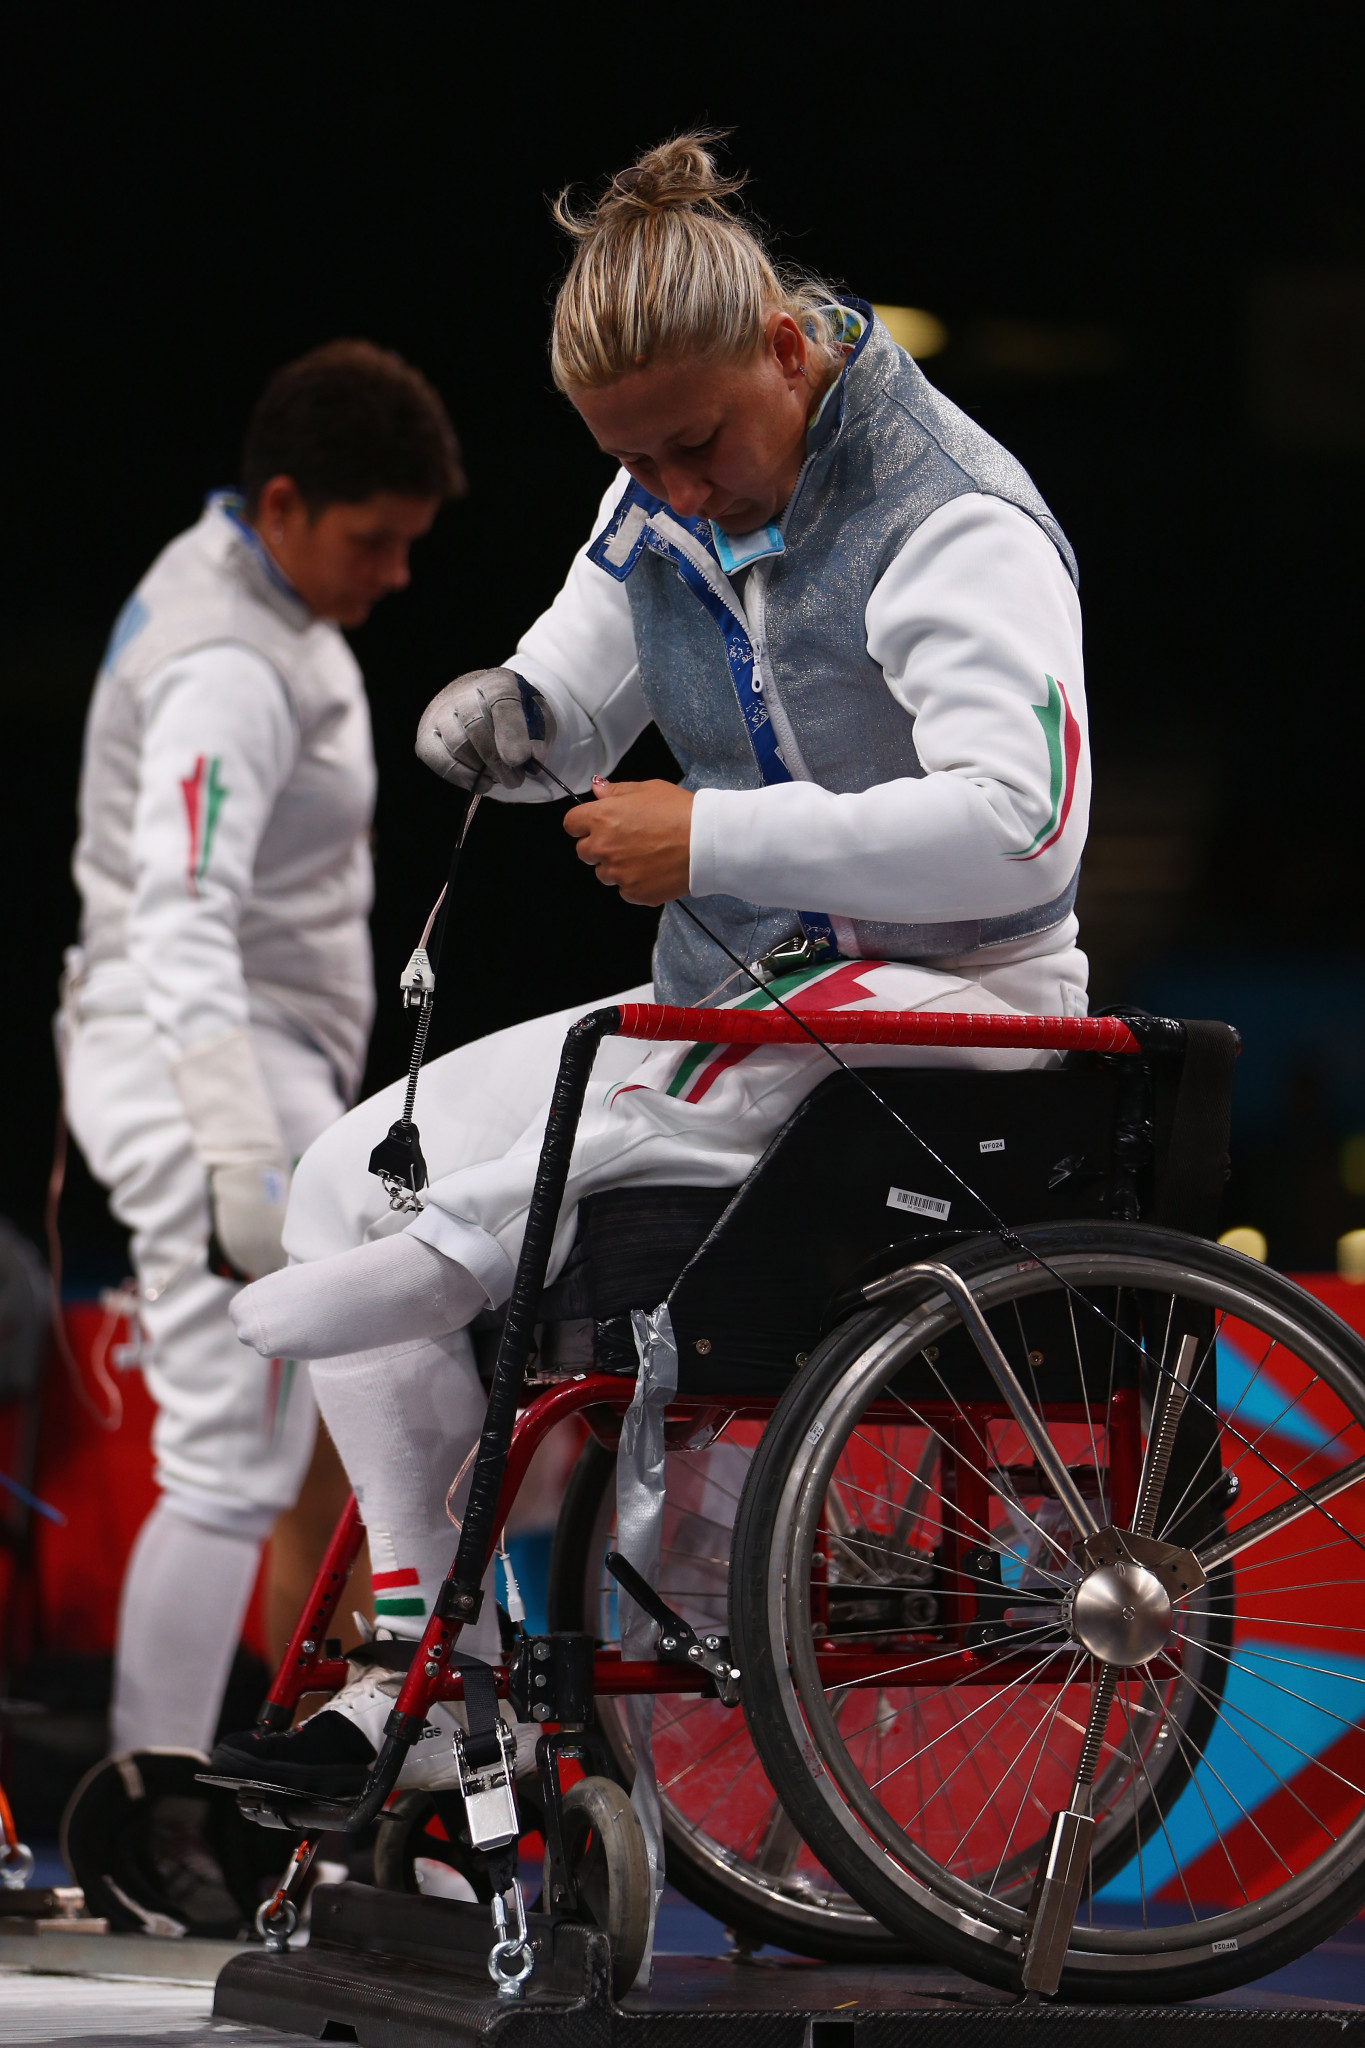 Zsuzsanna Krajnyák won a gold medal at the Wheelchair Fencing World Championships in November 2017 ©Getty Images